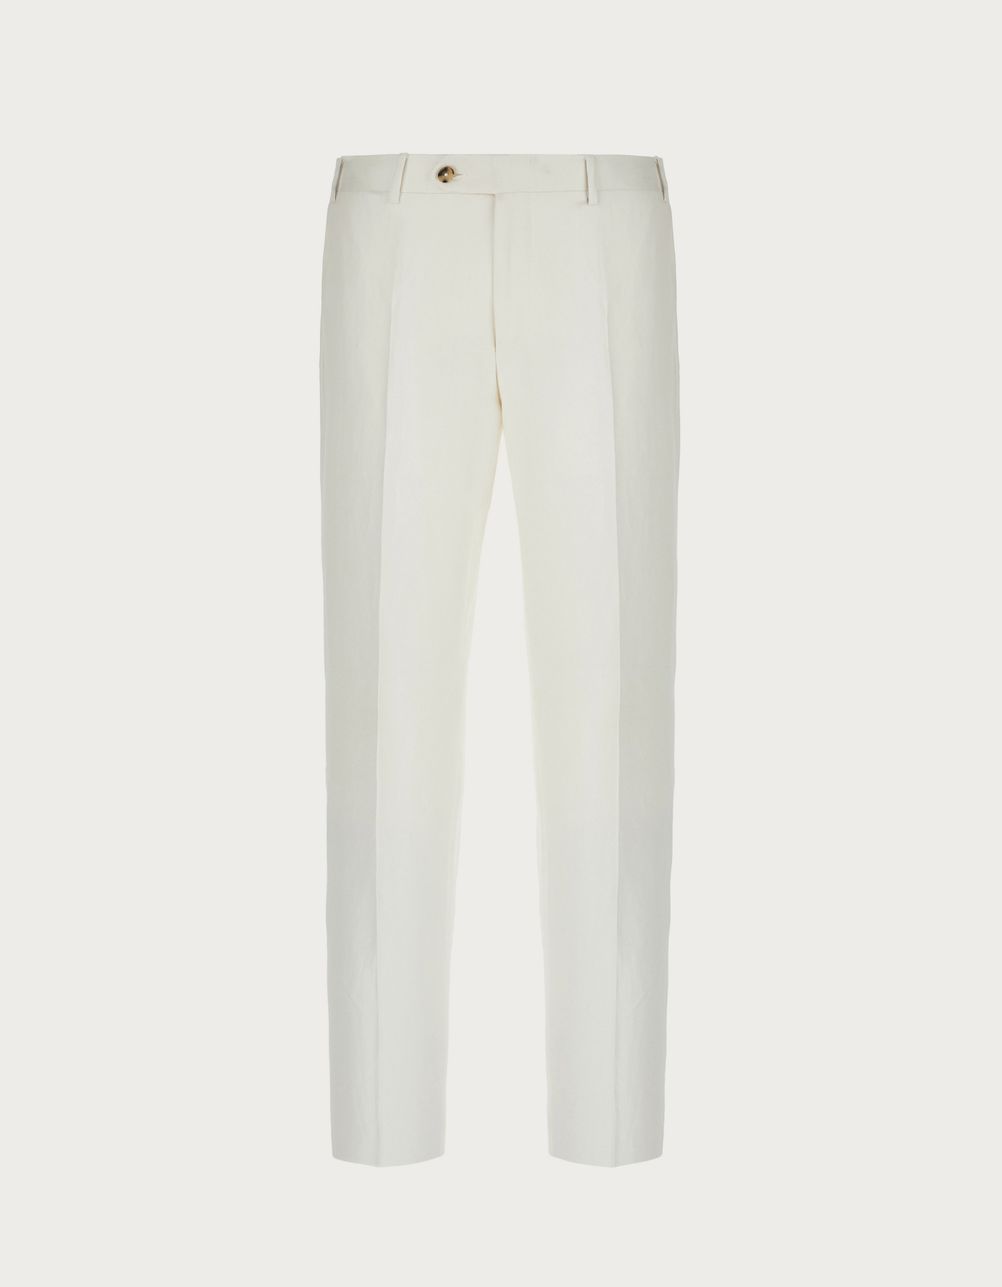 White pants in silk and linen - Exclusive